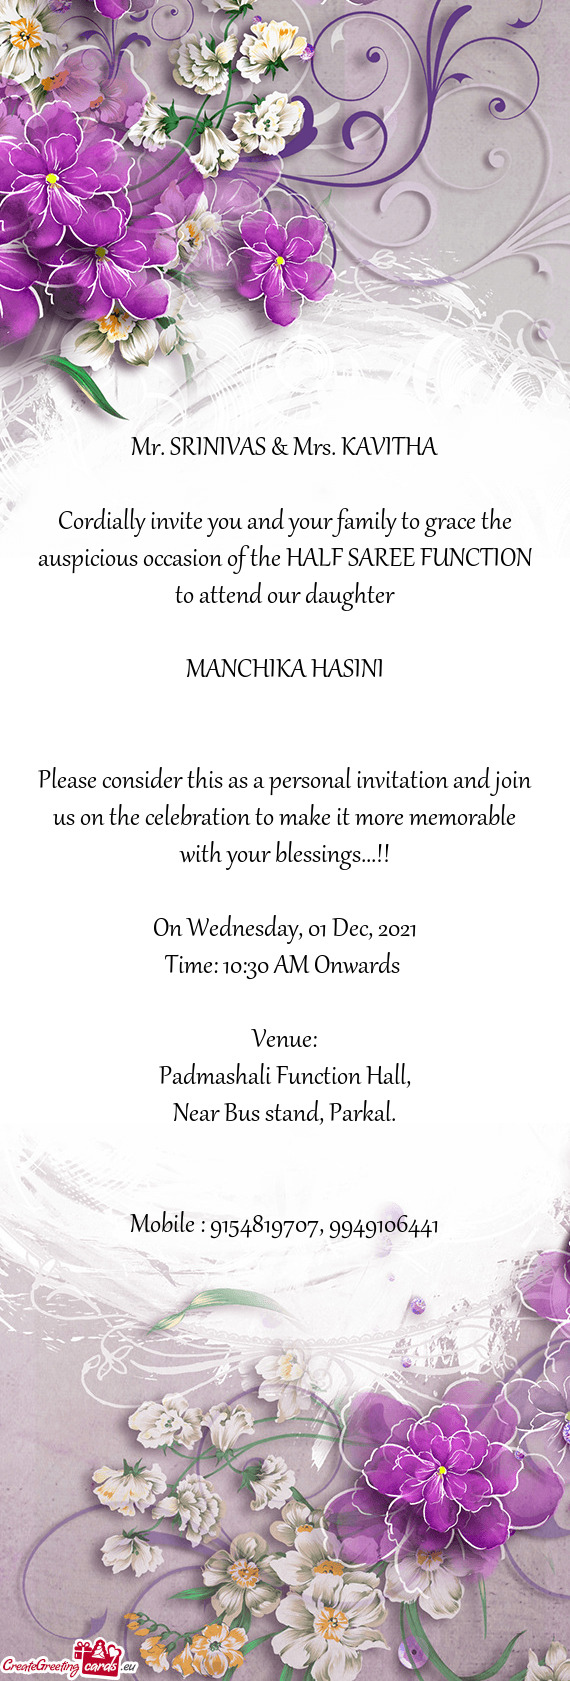 Cordially invite you and your family to grace the auspicious occasion of the HALF SAREE FUNCTION to